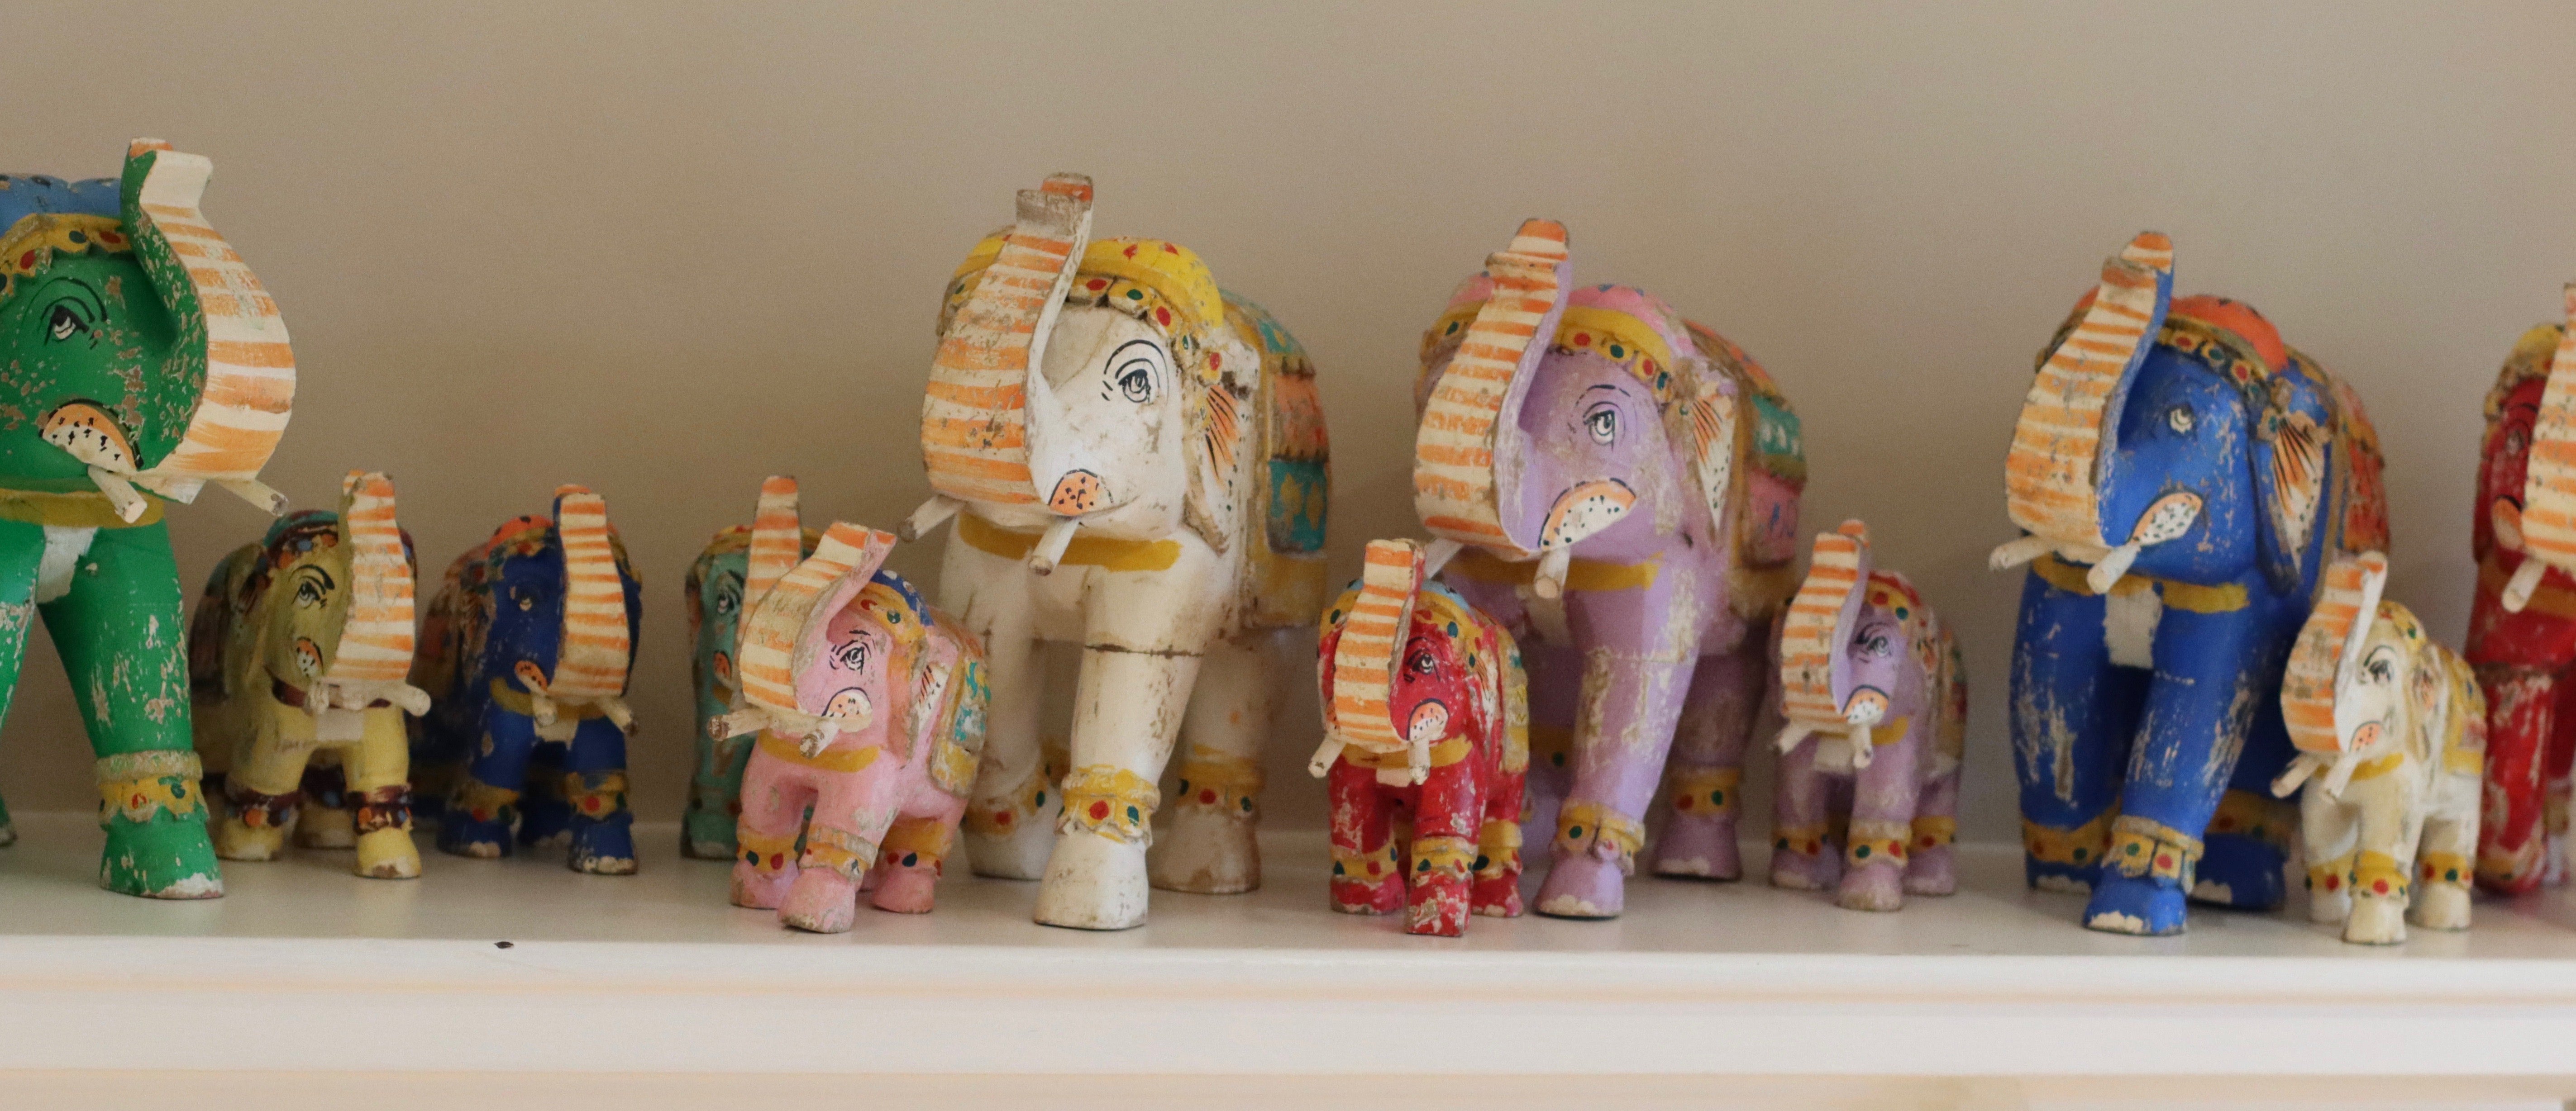 HAND PAINTED WOODEN ELEPHANTS